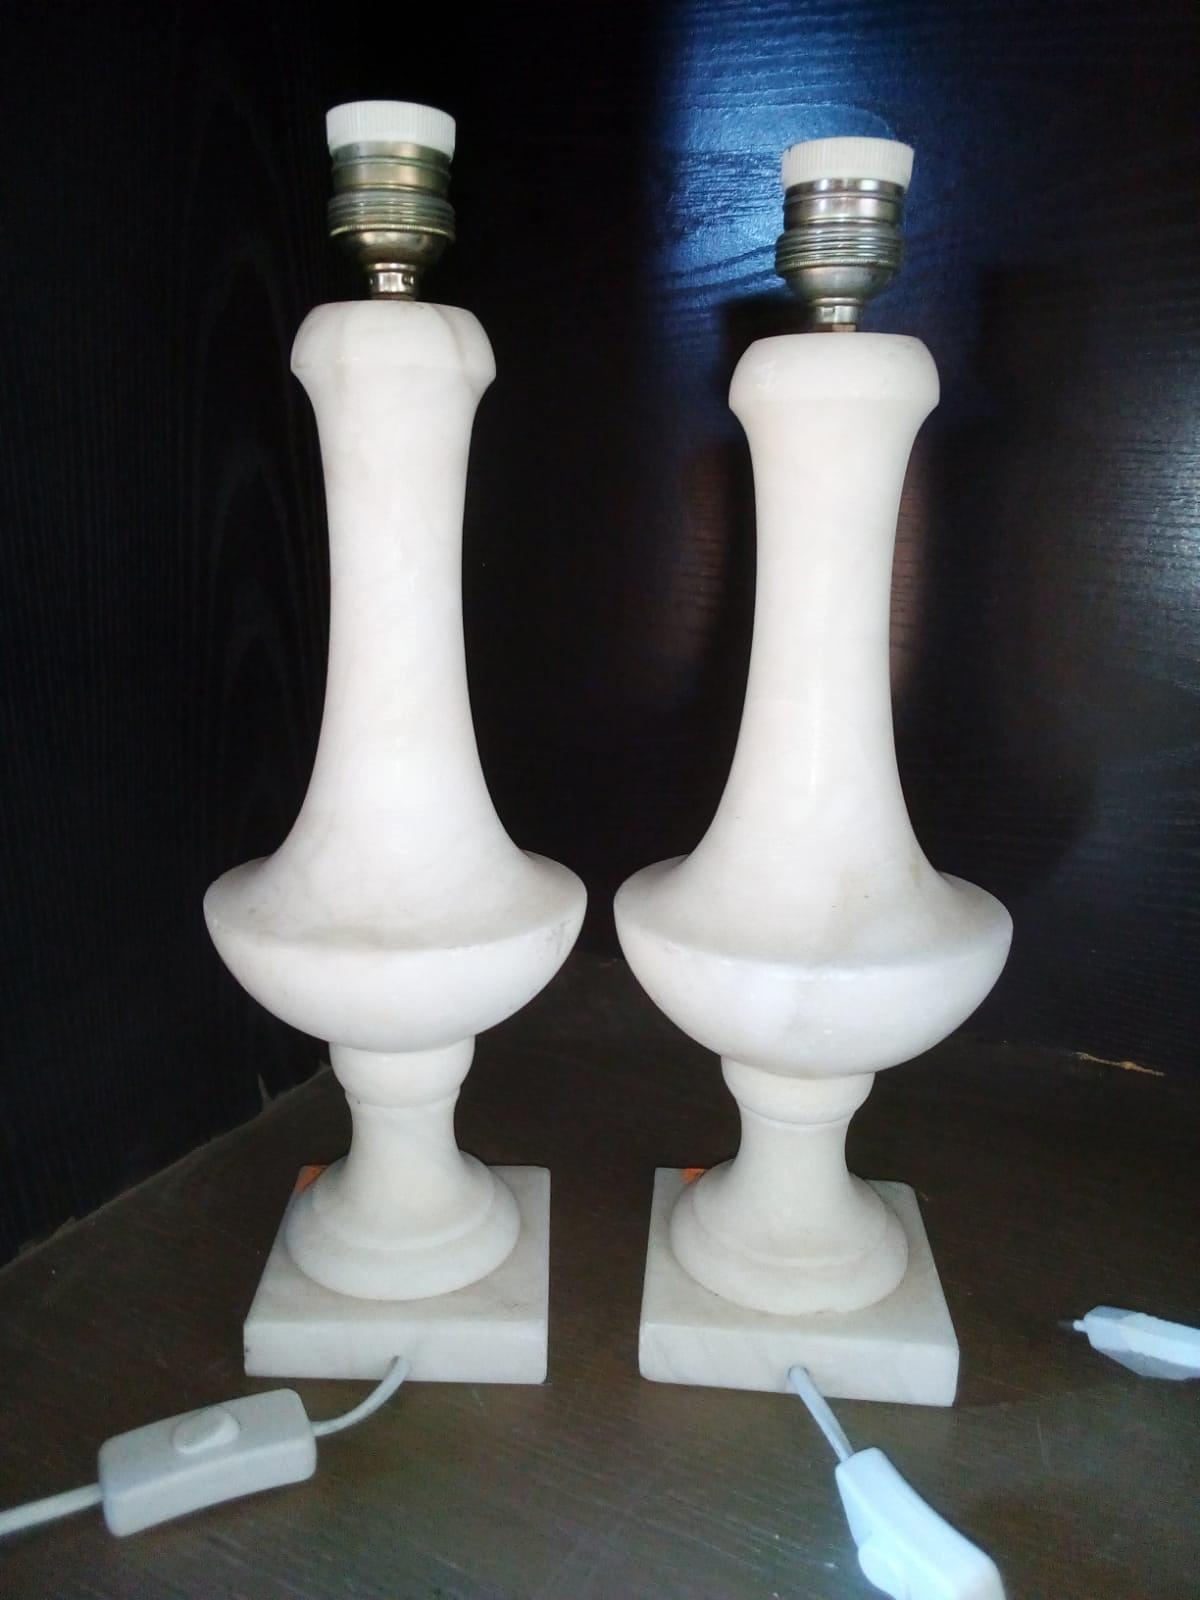 *Covid-19 -I ship with international express.Insure sending regularly and safely US, UK and Europe .Other destinations consult

If the shipment is to the USA, it is sent with European to American plug adapter

Table lamp in  white alabaster or